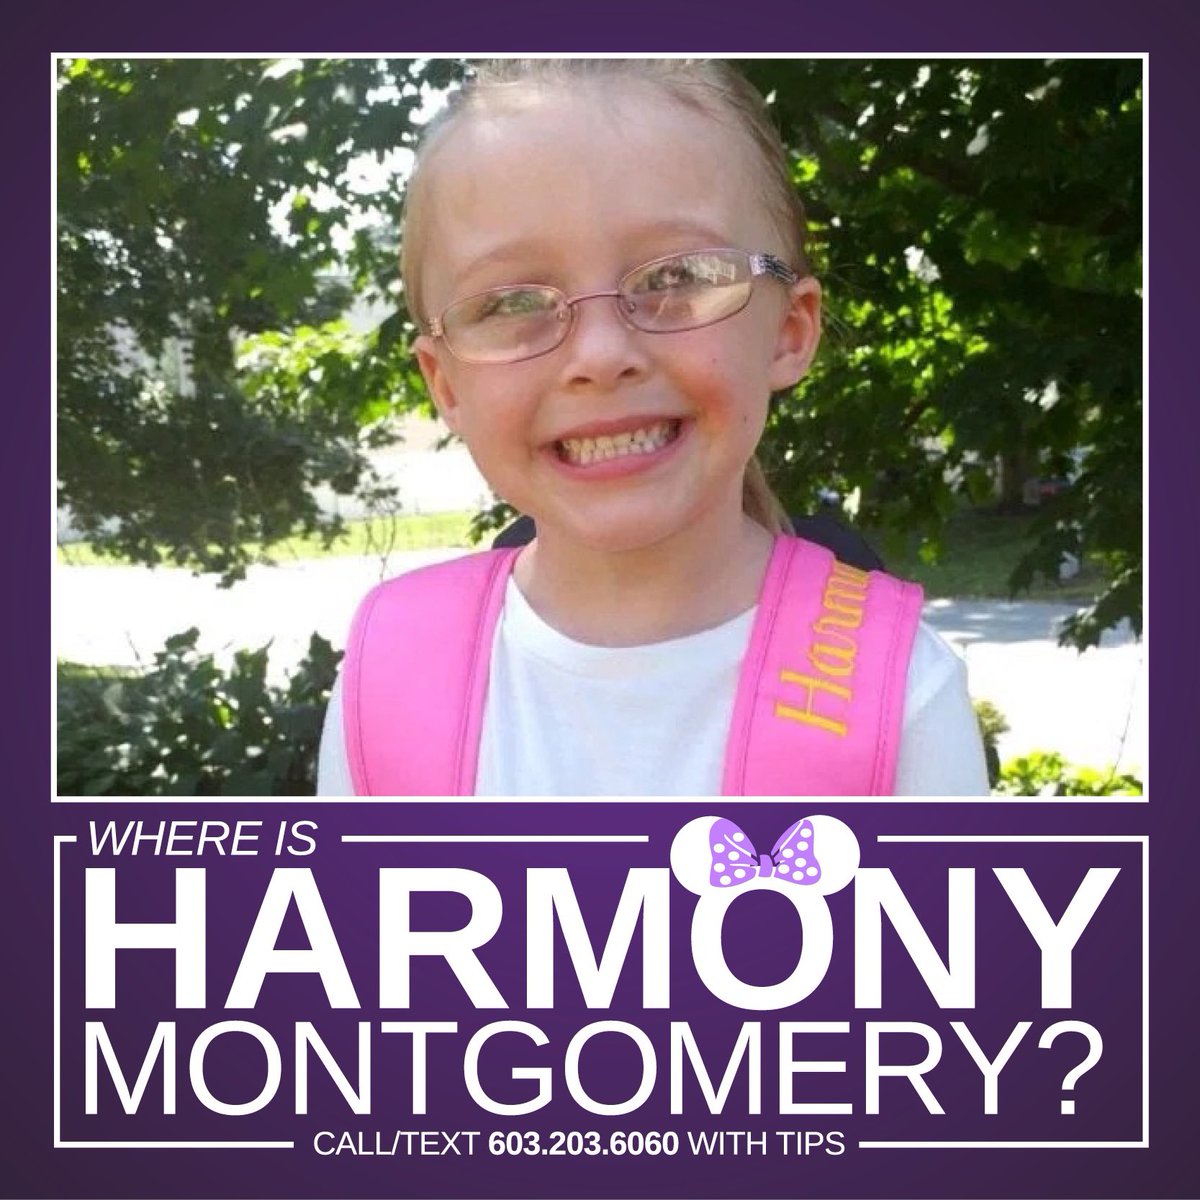 #ICouldNeverSupport #MissingChild #HarmonyMontgomery becoming a #ColdCase 💜 find her already, @NH_DOJ